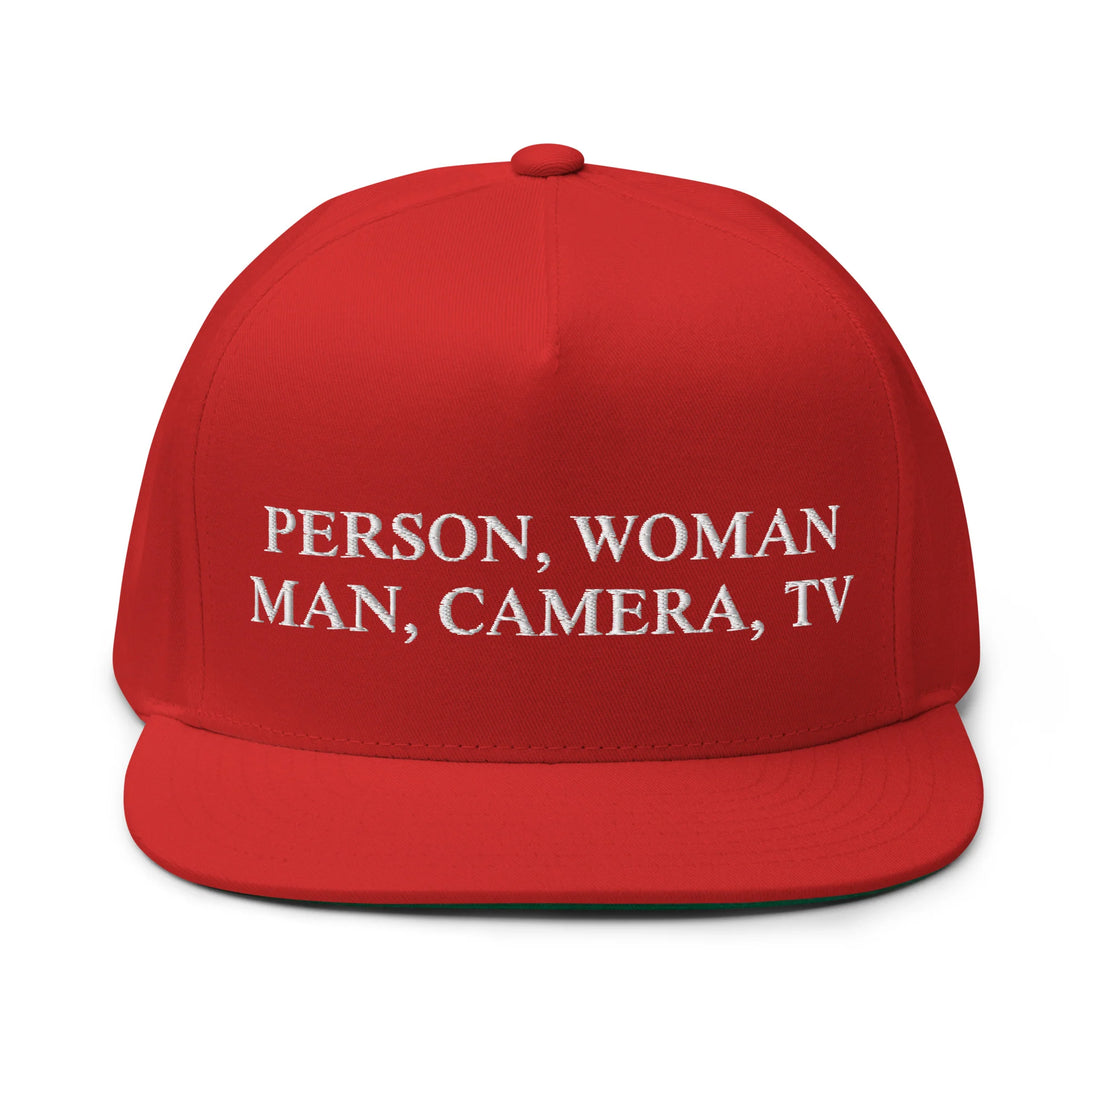 Person, Woman, Man, Camera, TV Cap - The Hat That Remembers So You Don't Have To